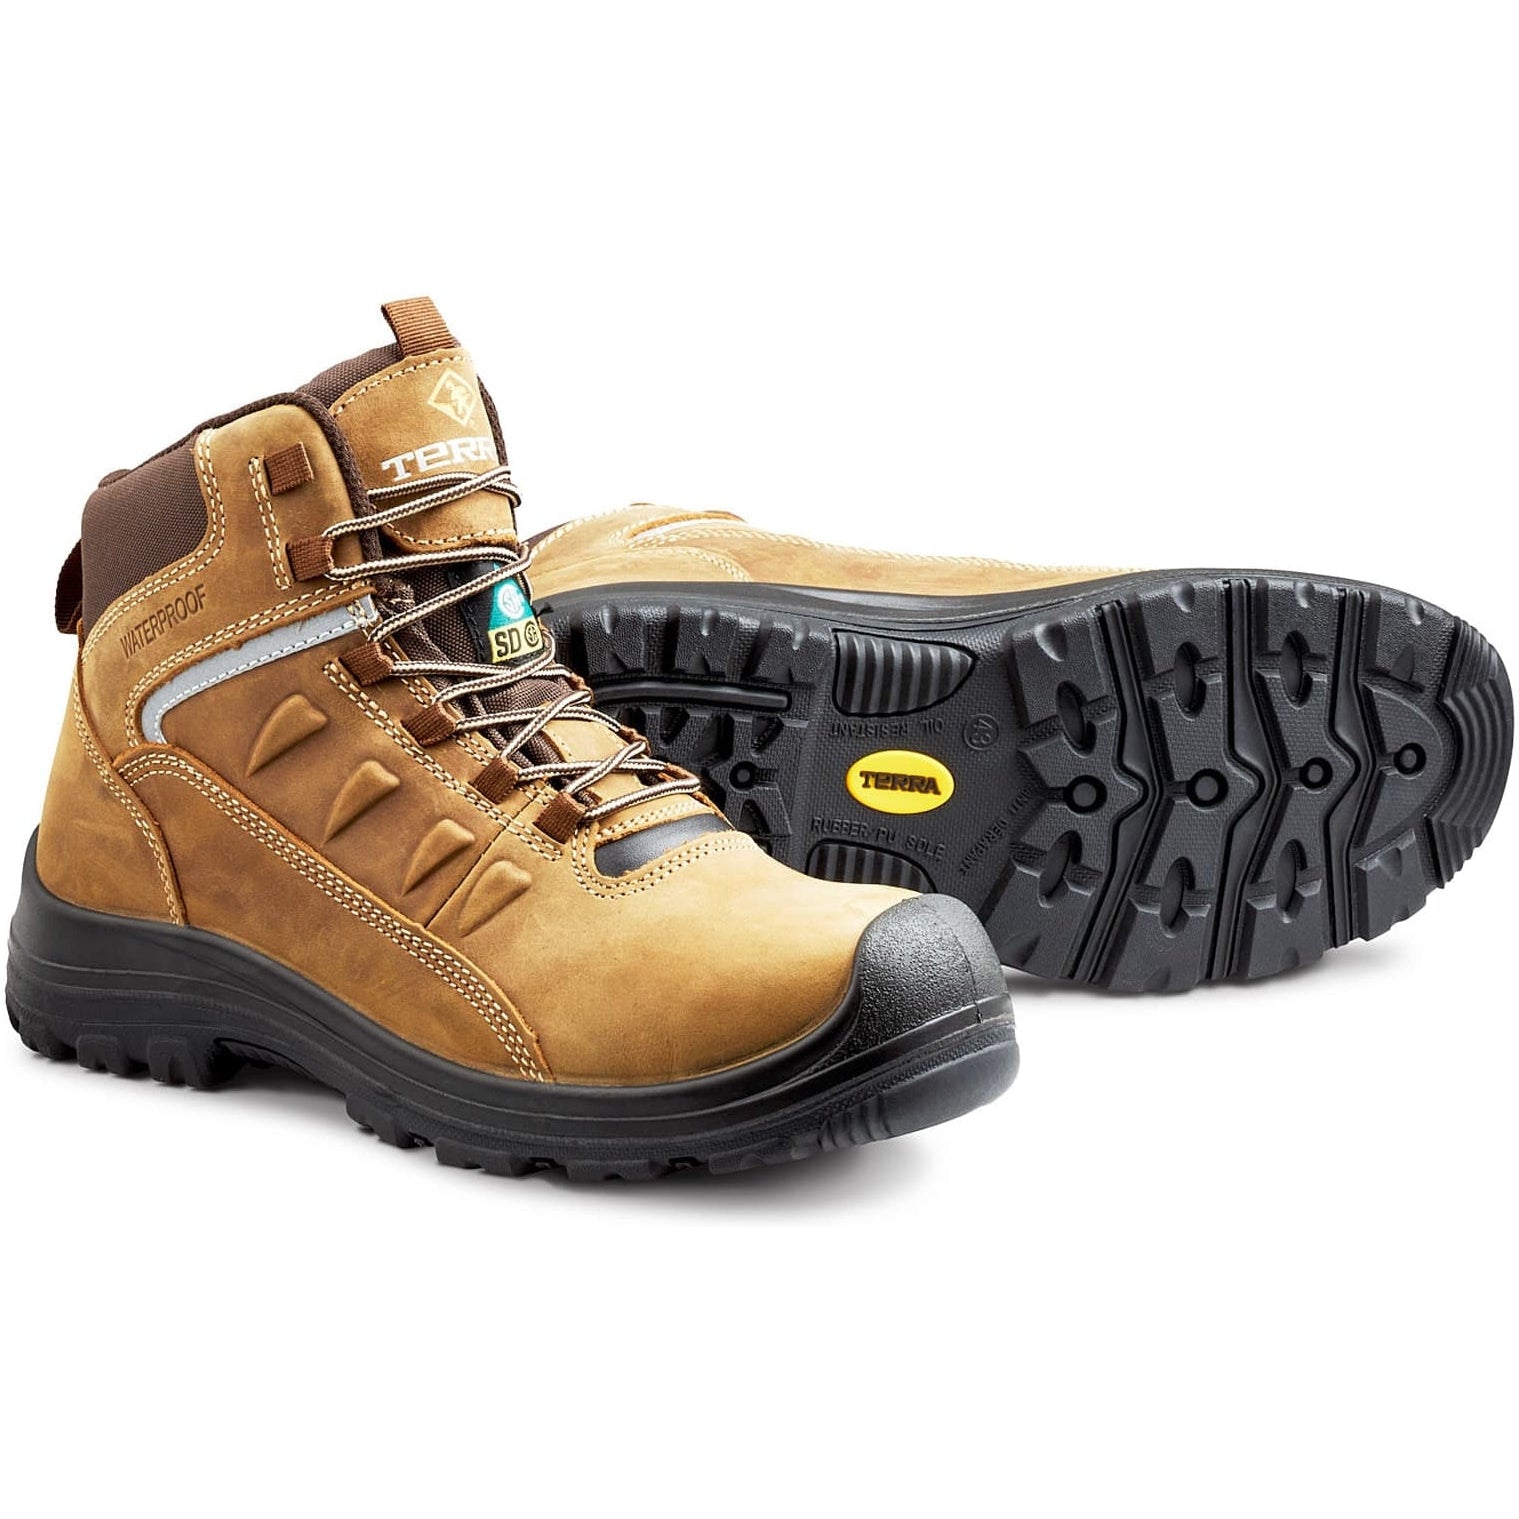 Terra Men's Findlay 6" Comp Toe WP Safety Work Boot -Brown- R5204B  - Overlook Boots